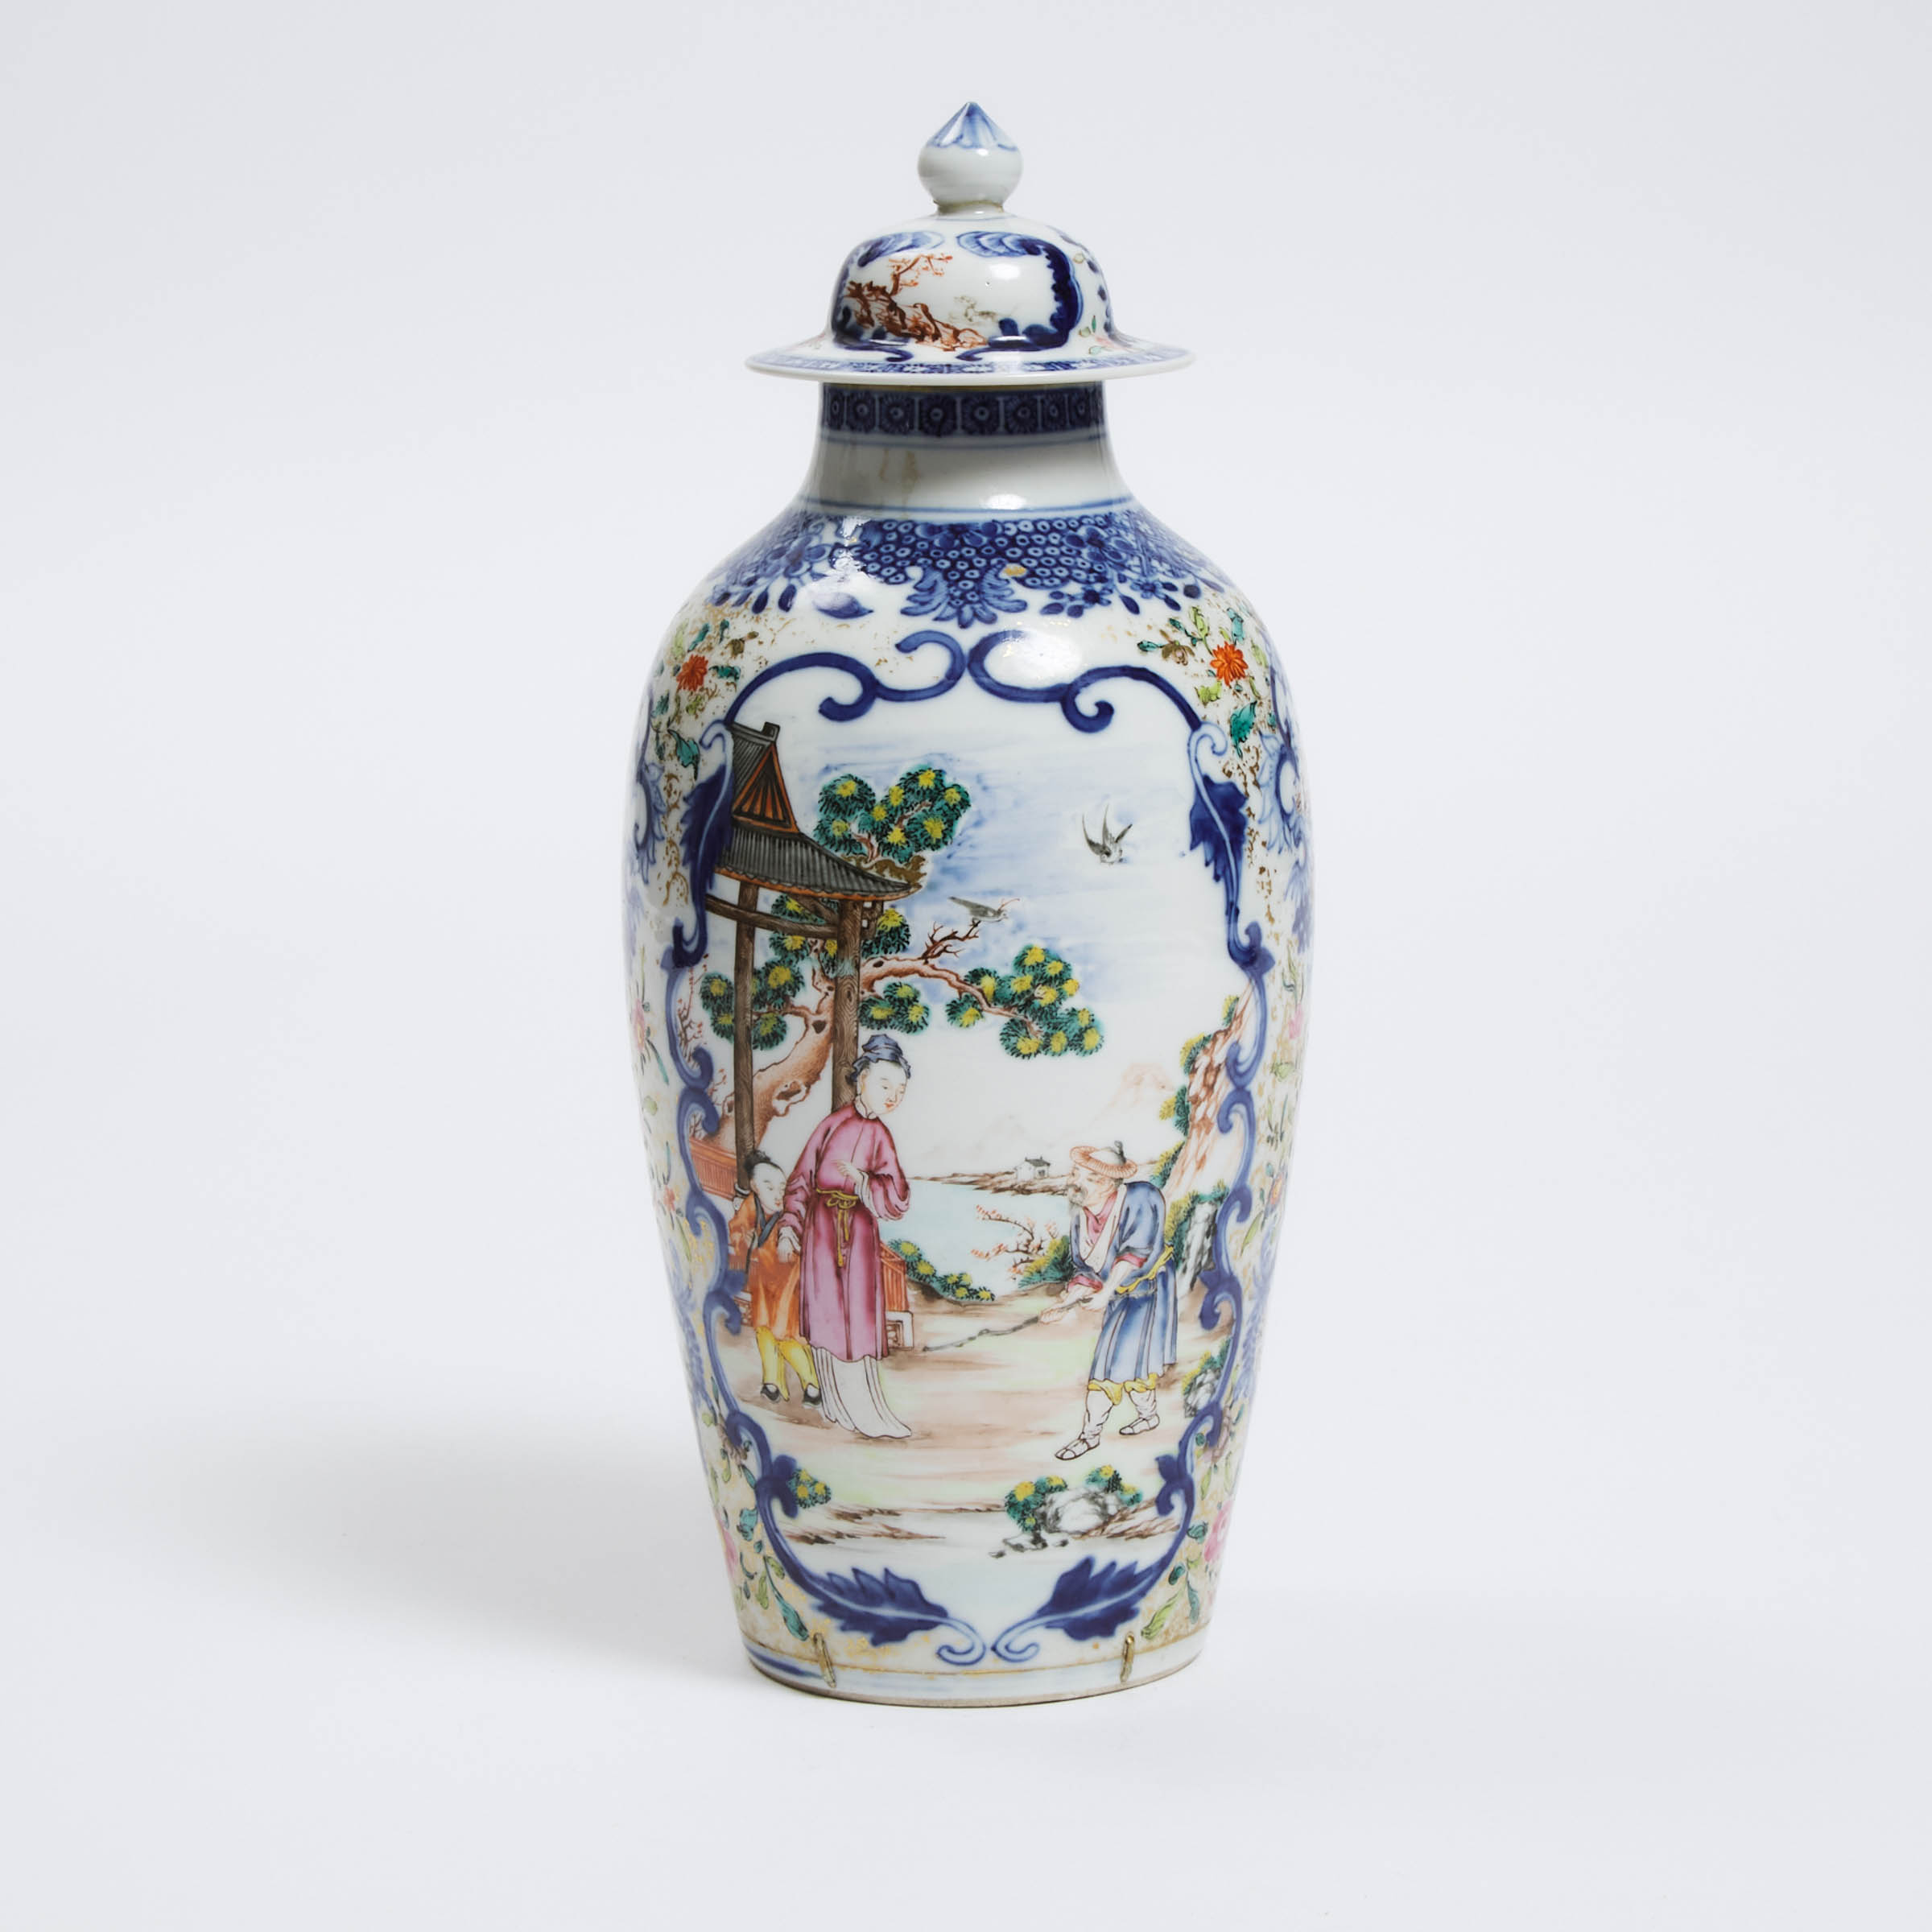 A Chinese Export Famille Rose Blue and White 'Figural' Vase and Cover, Qianlong Period, Circa 1870